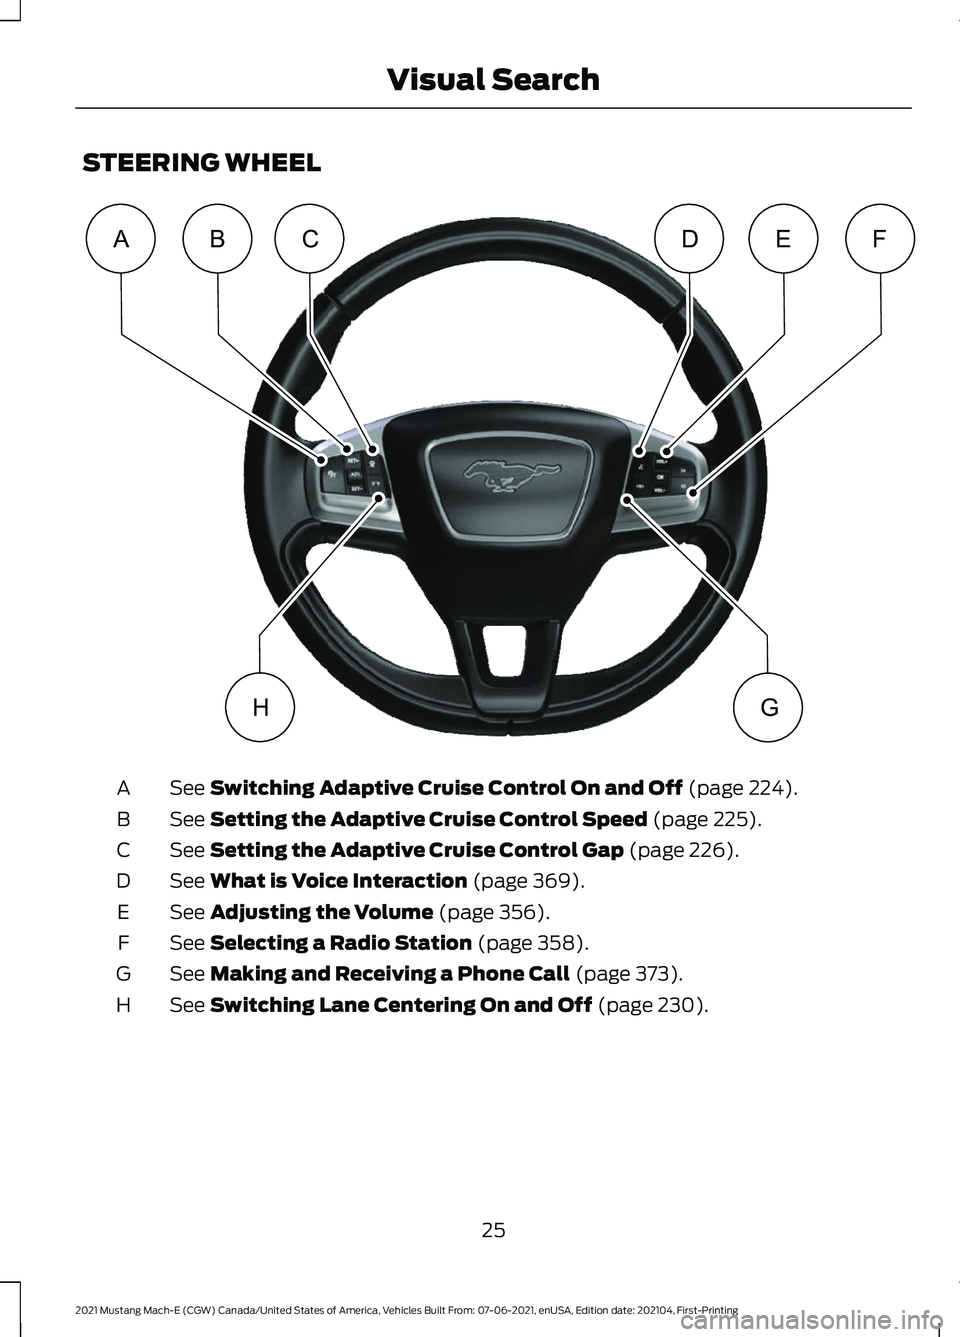 FORD MUSTANG MACH-E 2021  Owners Manual STEERING WHEEL
See Switching Adaptive Cruise Control On and Off (page 224).
A
See 
Setting the Adaptive Cruise Control Speed (page 225).
B
See 
Setting the Adaptive Cruise Control Gap (page 226).
C
Se